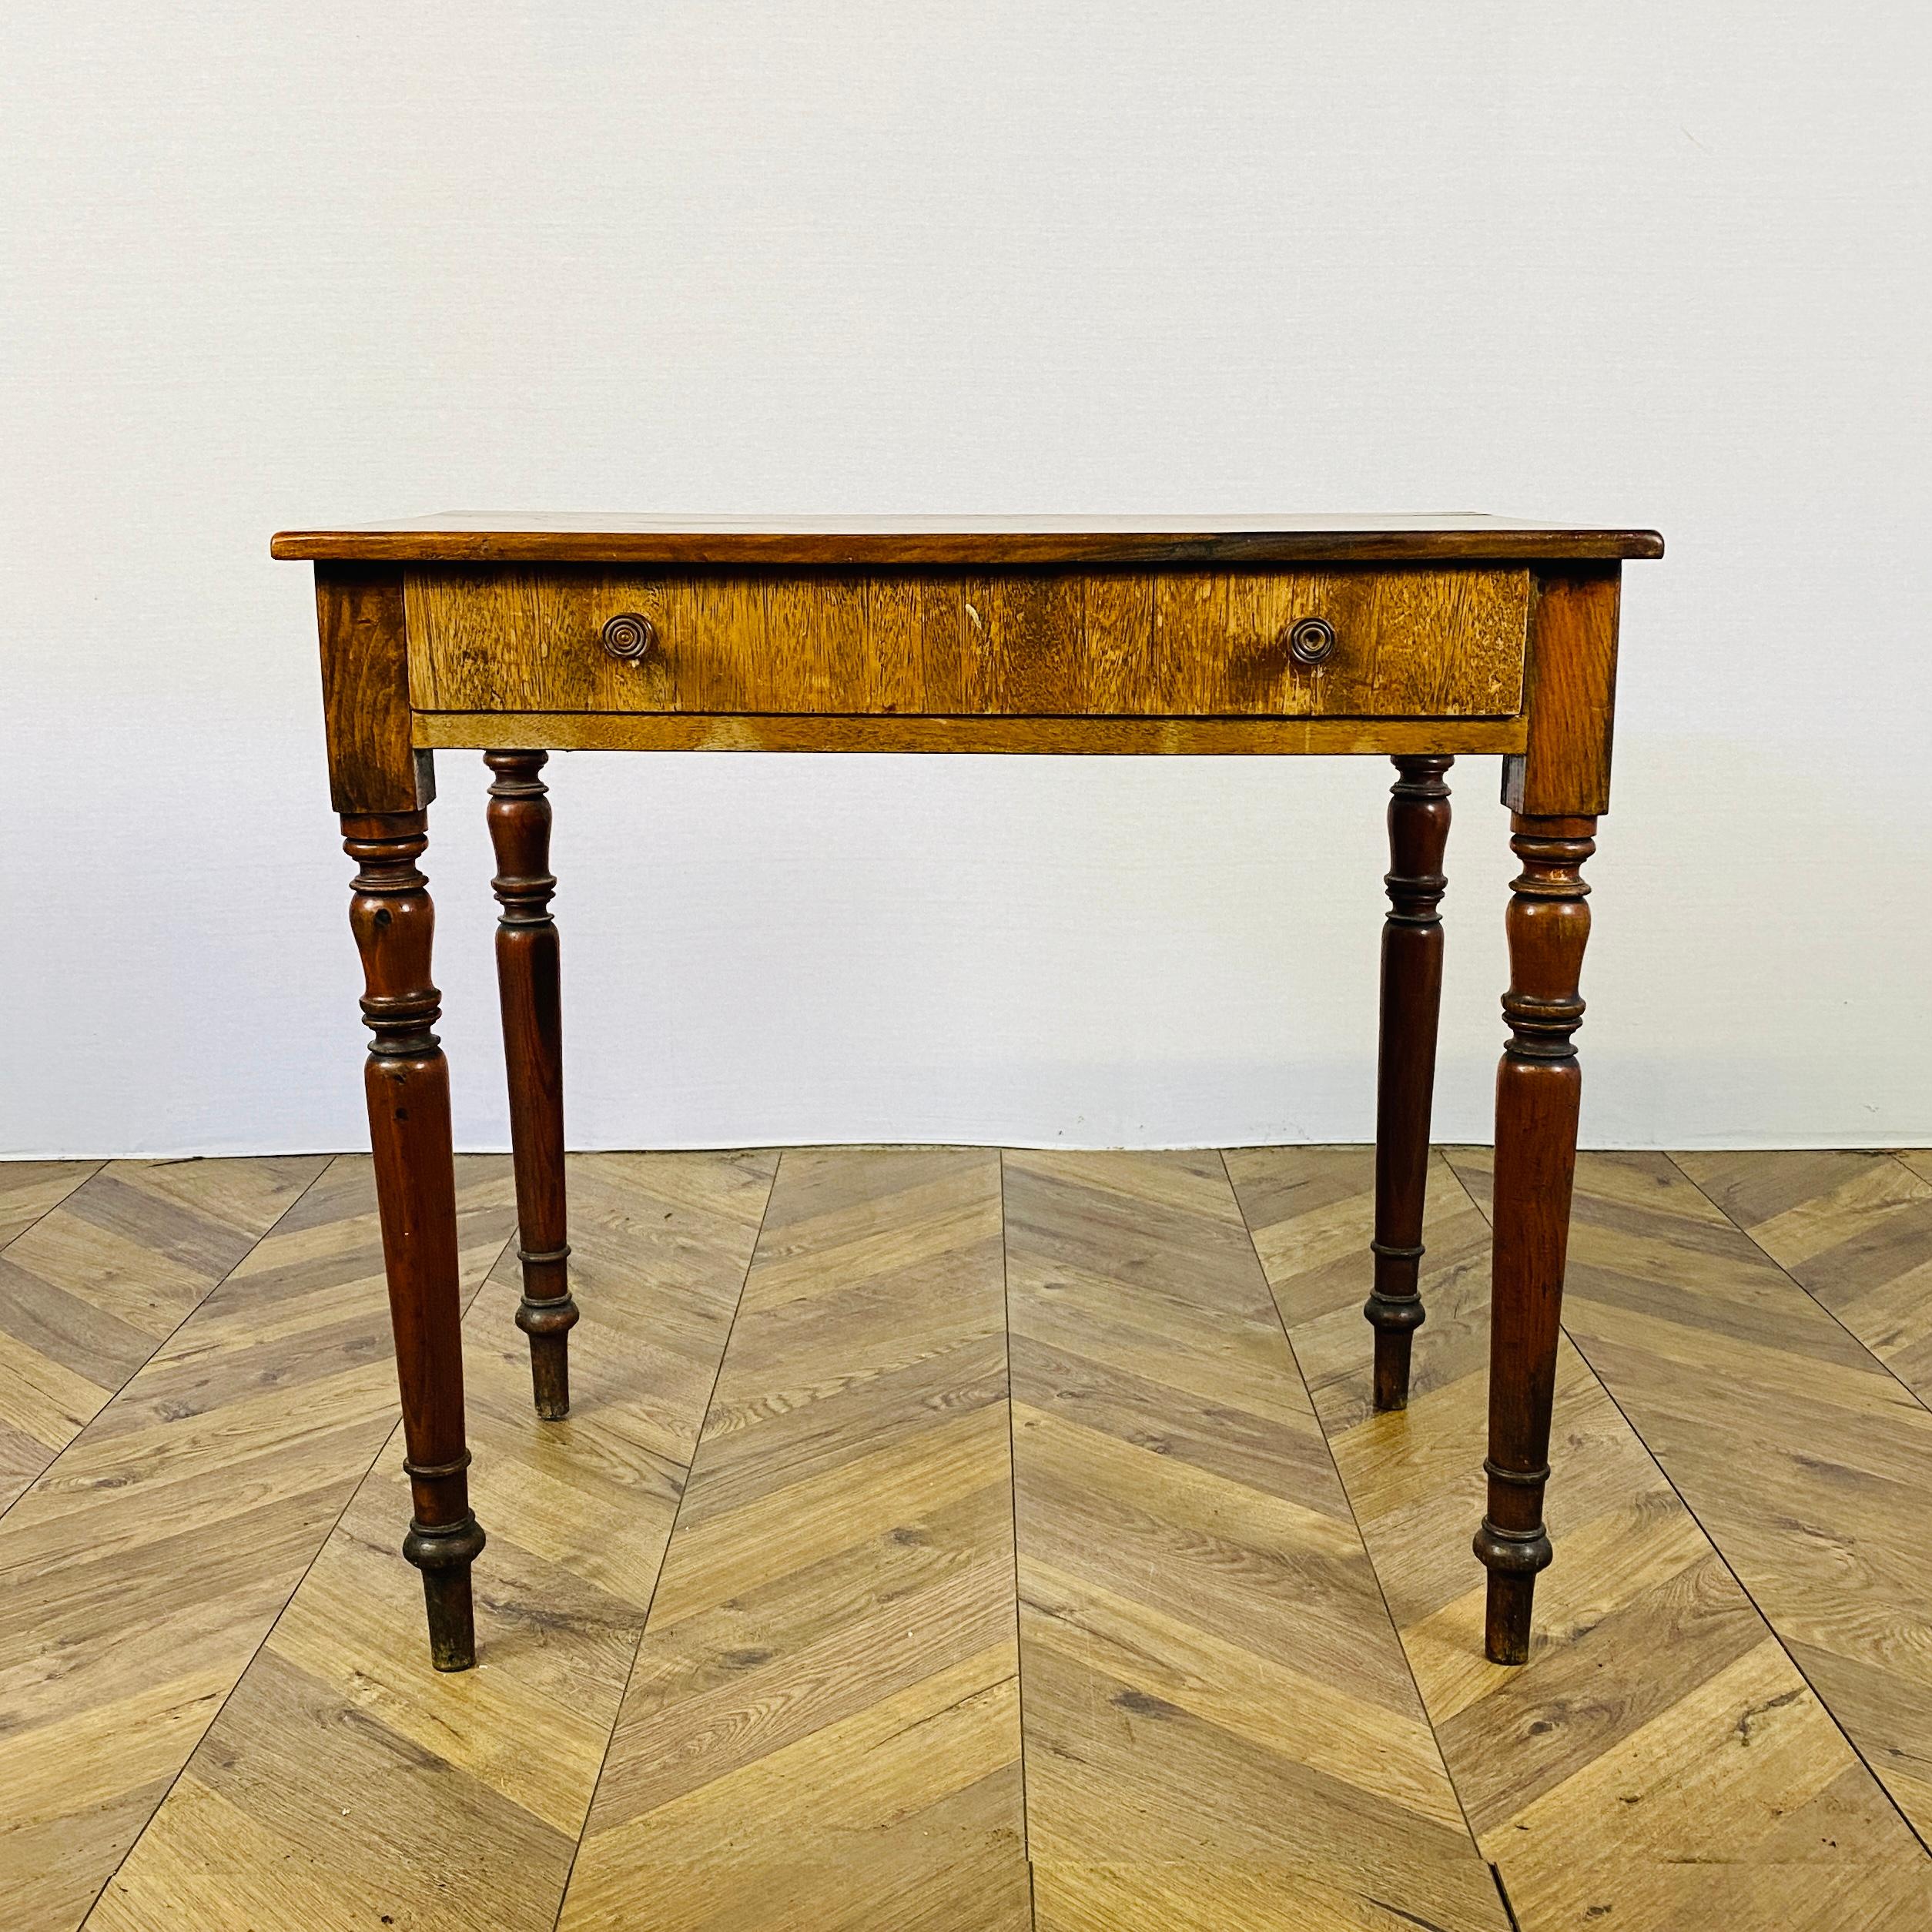 A Beautiful Antique Single Drawer Writing Desk or Side Table. circa 1820s

Made from Oak and sitting on turned legs, the table has good colour and patination and nice proportions.

Structurally, the table is good condition, with the drawer